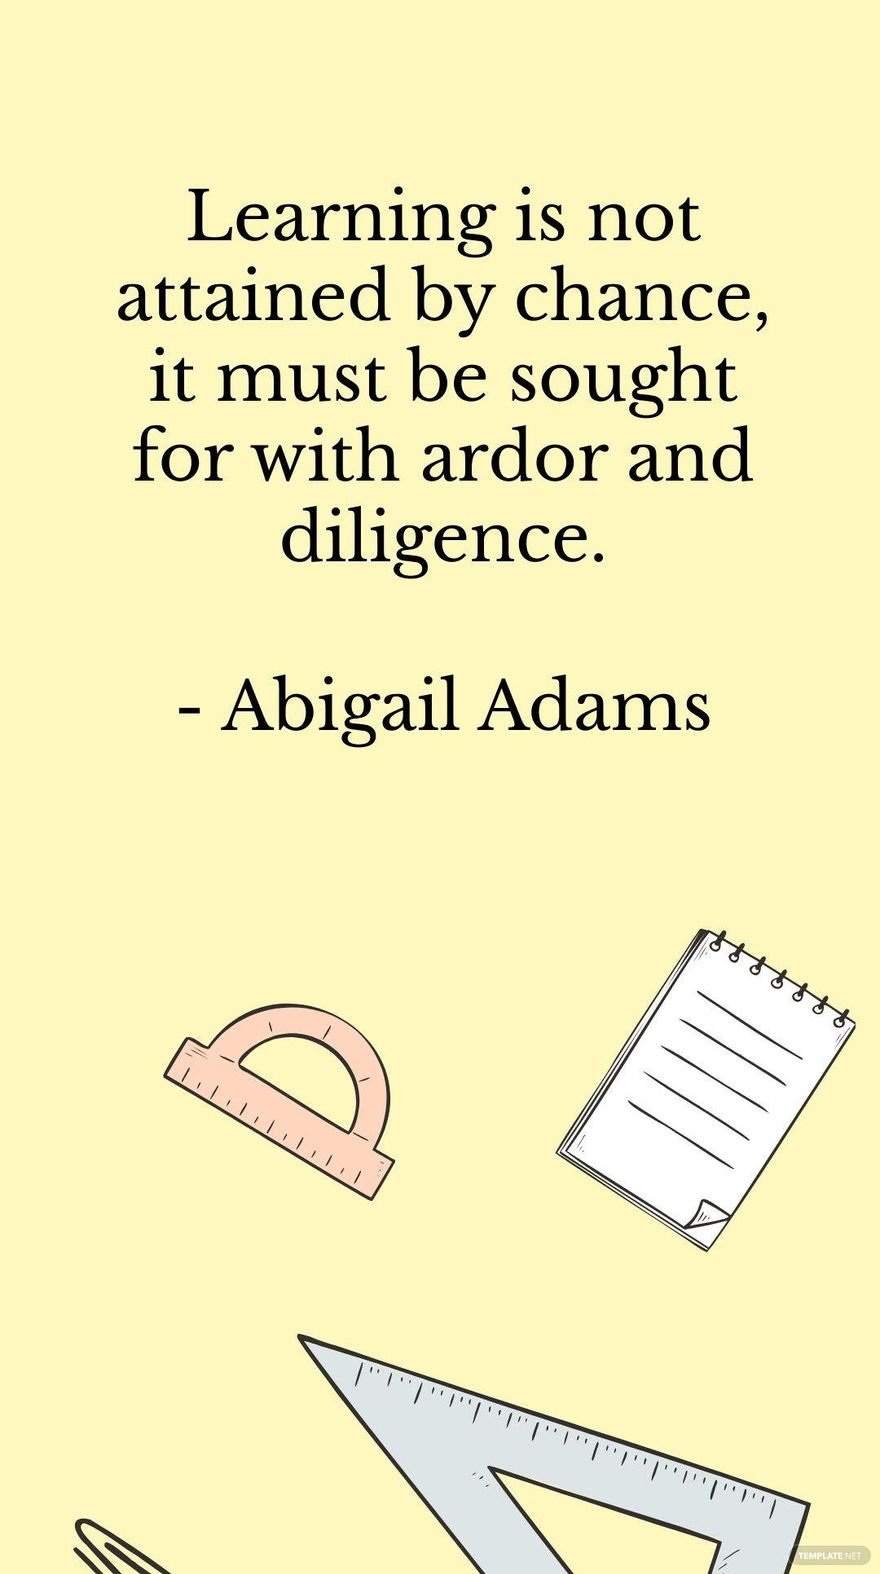 Abigail Adams - Learning is not attained by chance, it must be sought for with ardor and diligence.